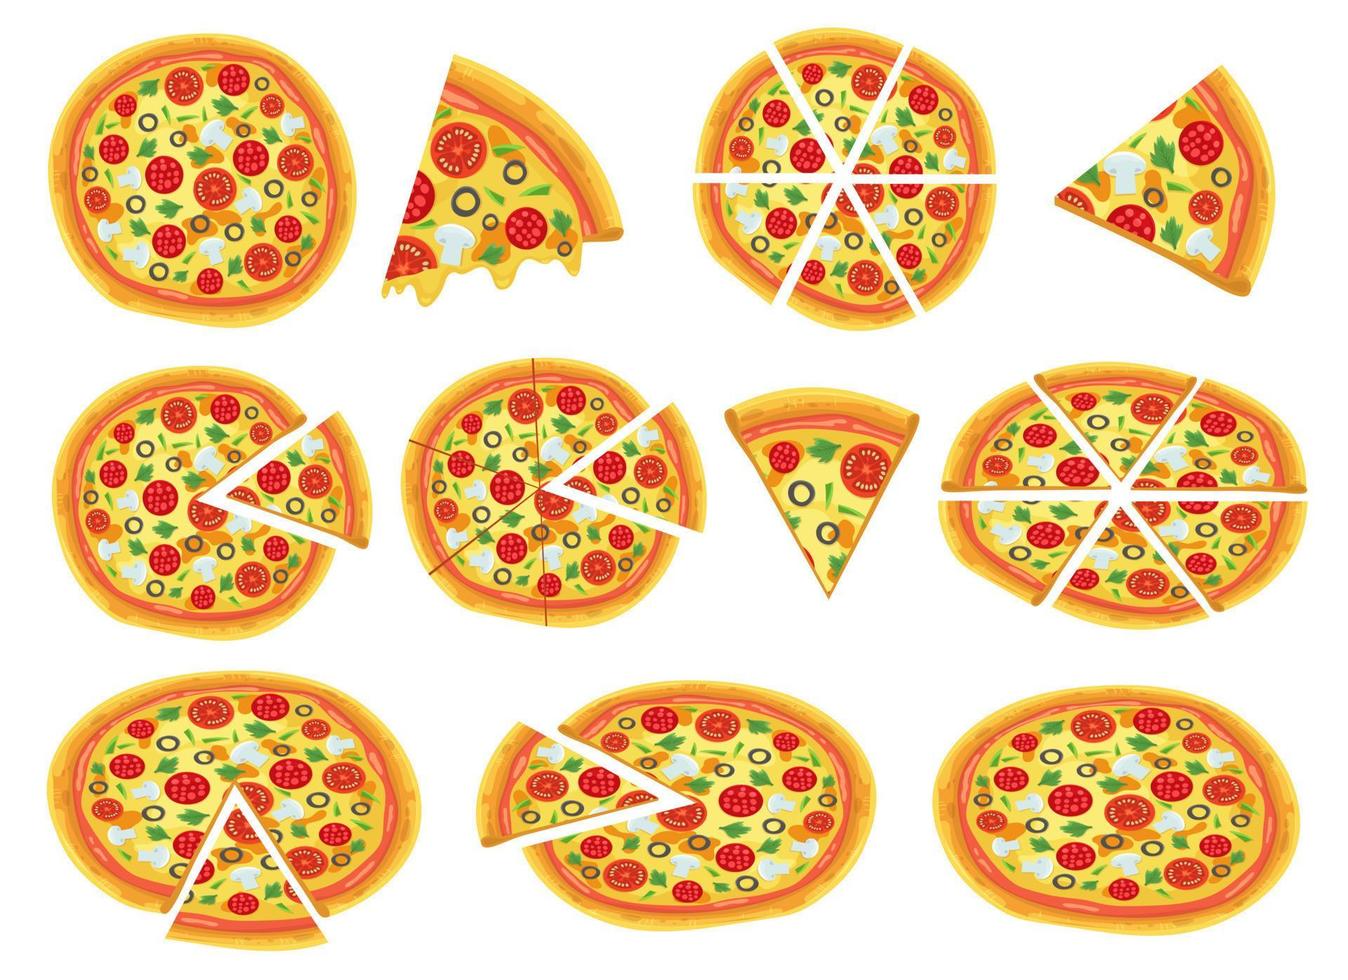 Pizza vector design illustration isolated on white background